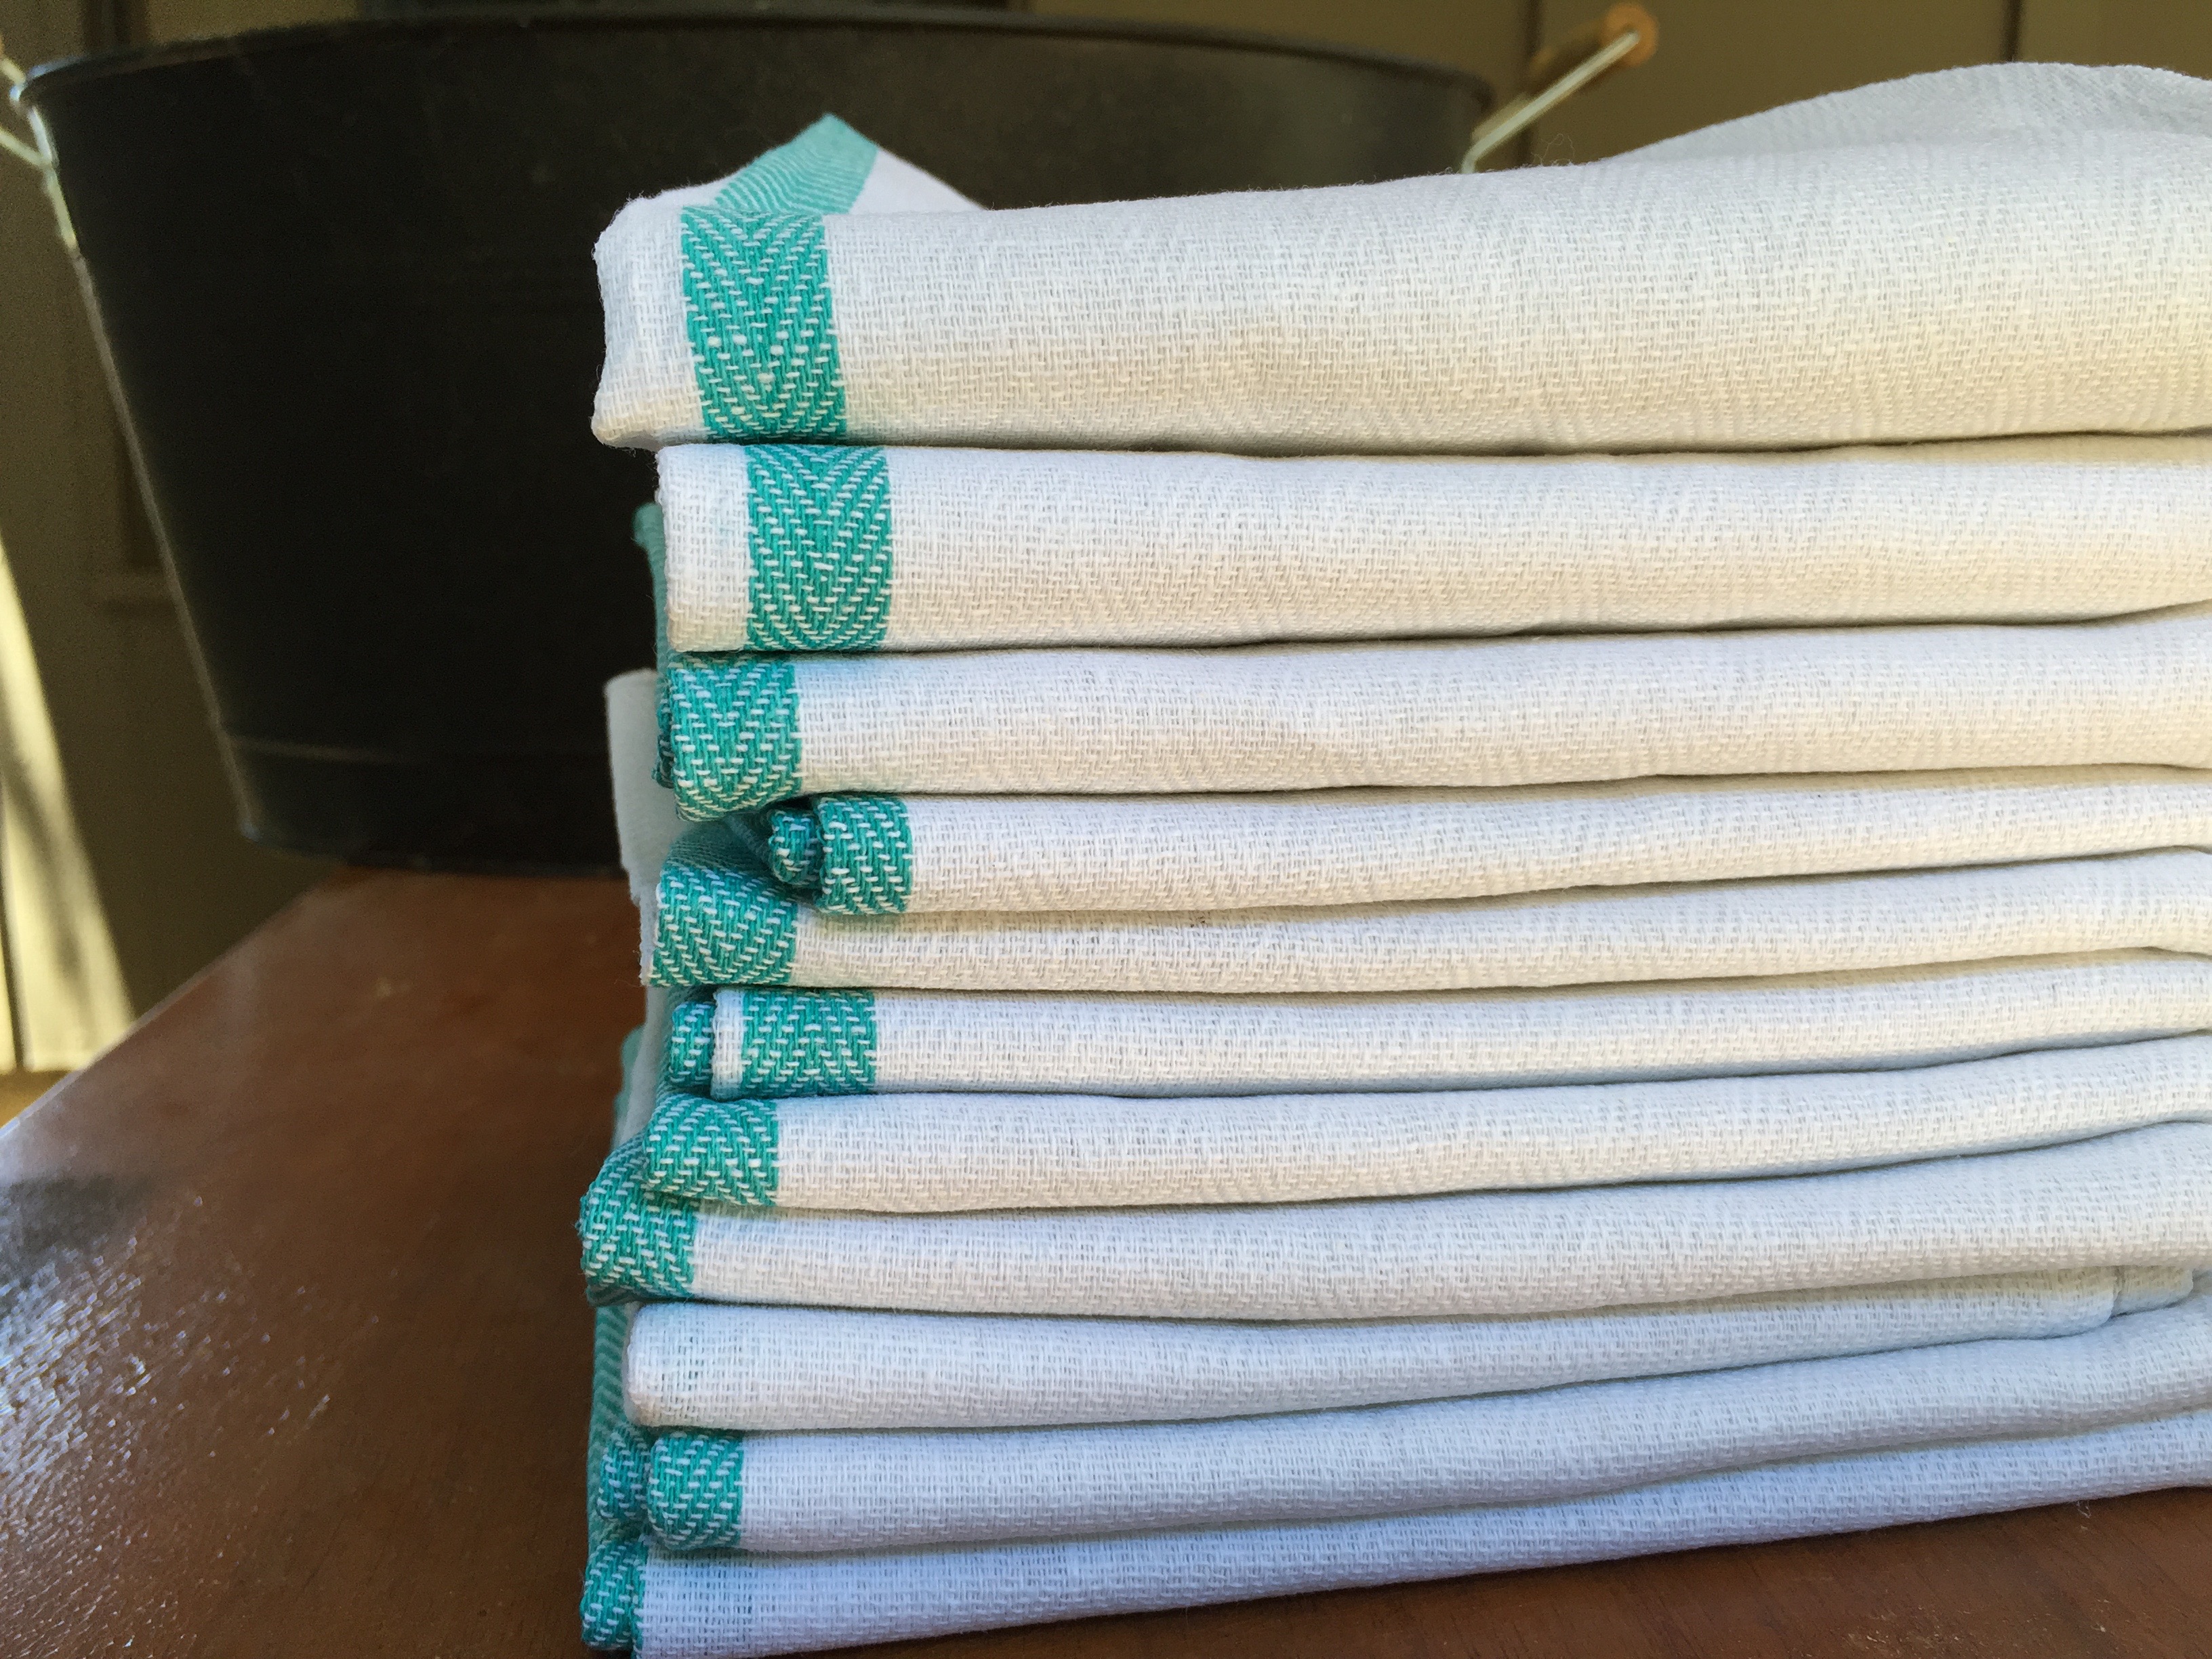 http://texasovenco.com/wp-content/uploads/2015/07/wood-fired-party-towels-7332.jpg